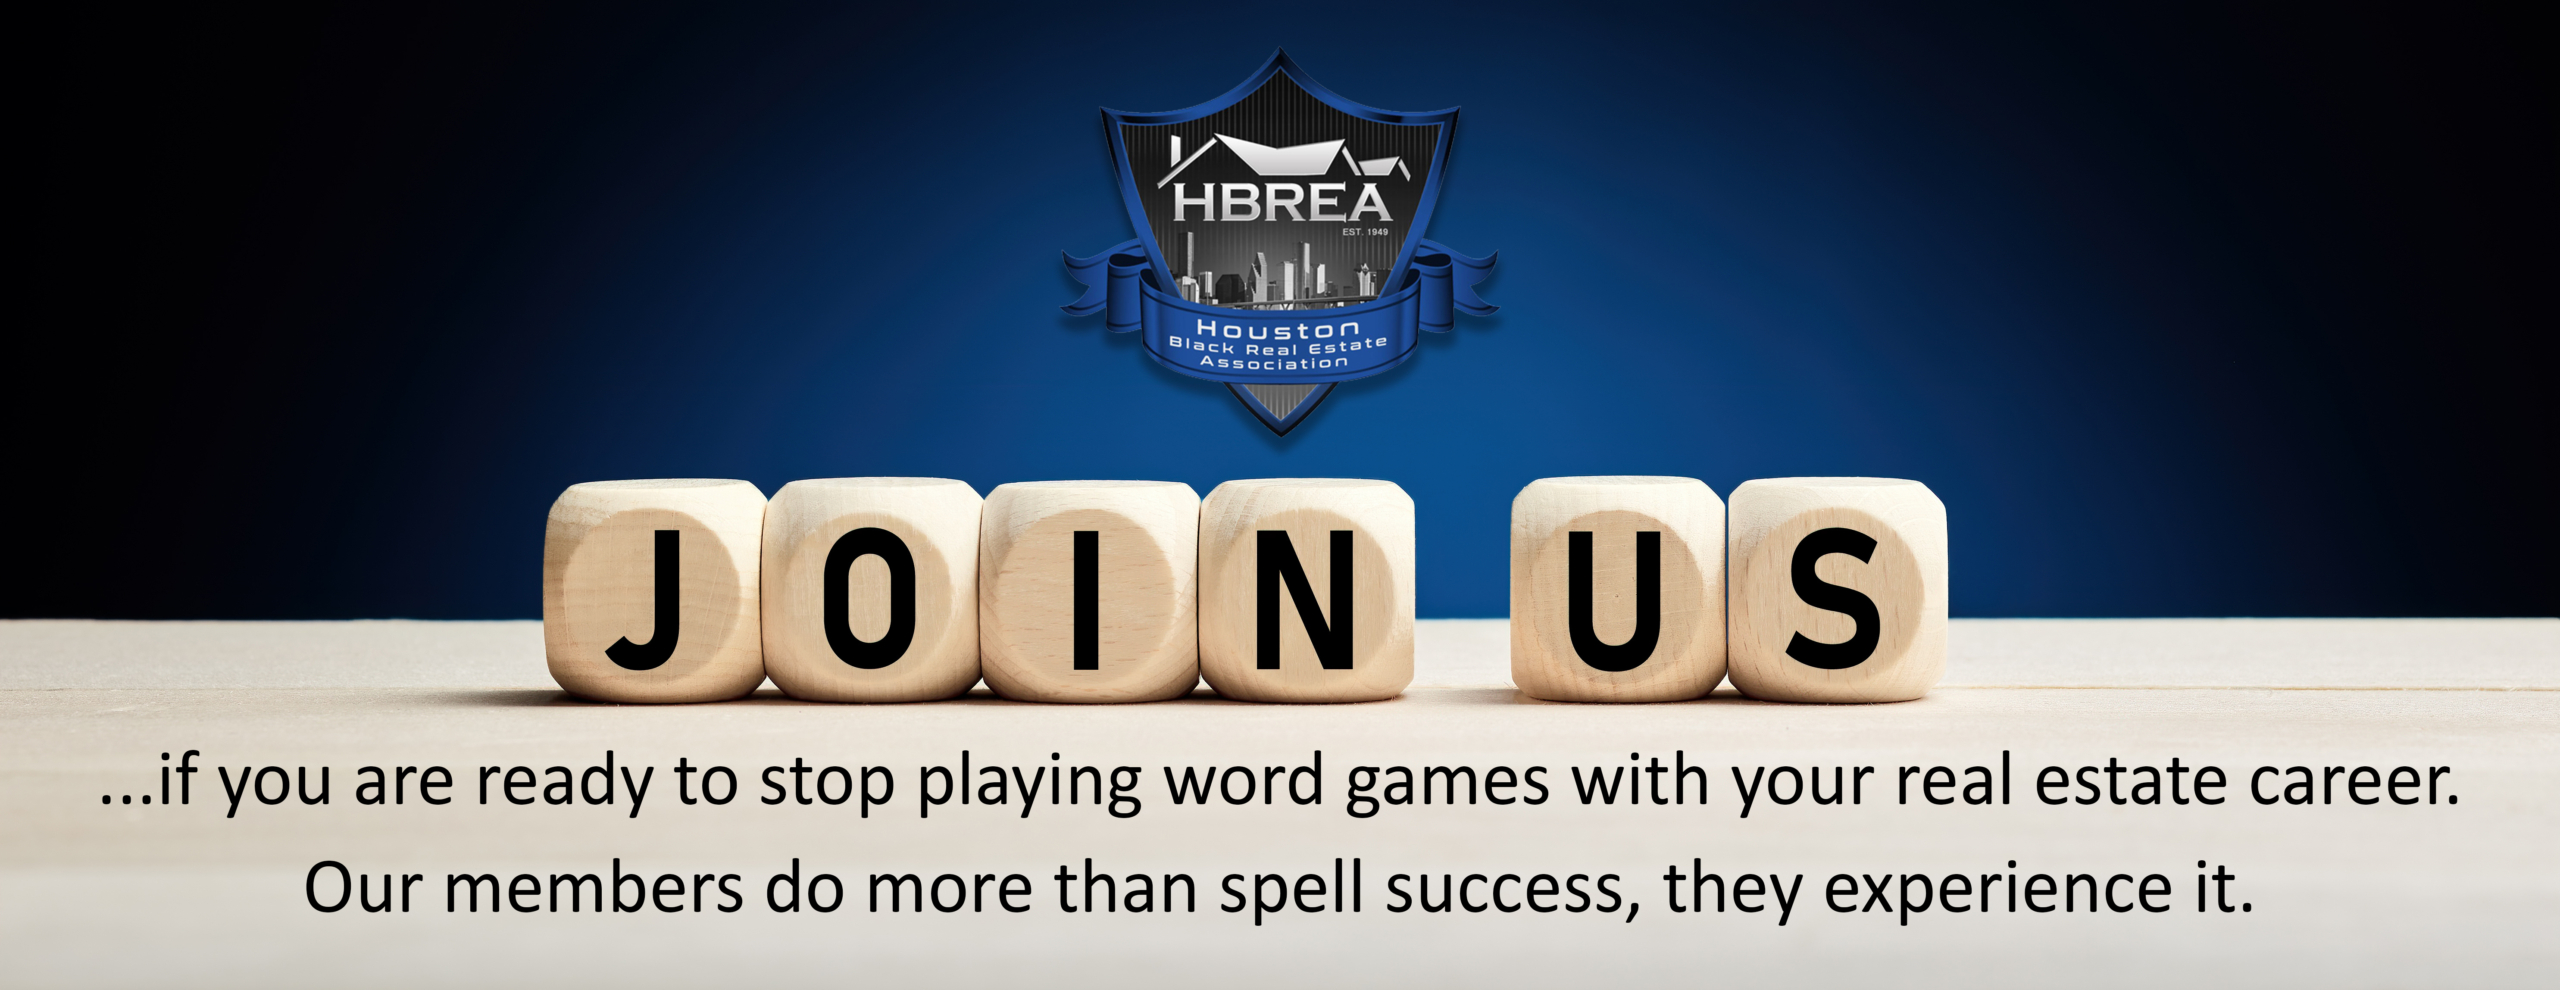 Join HBREA - Experience Success